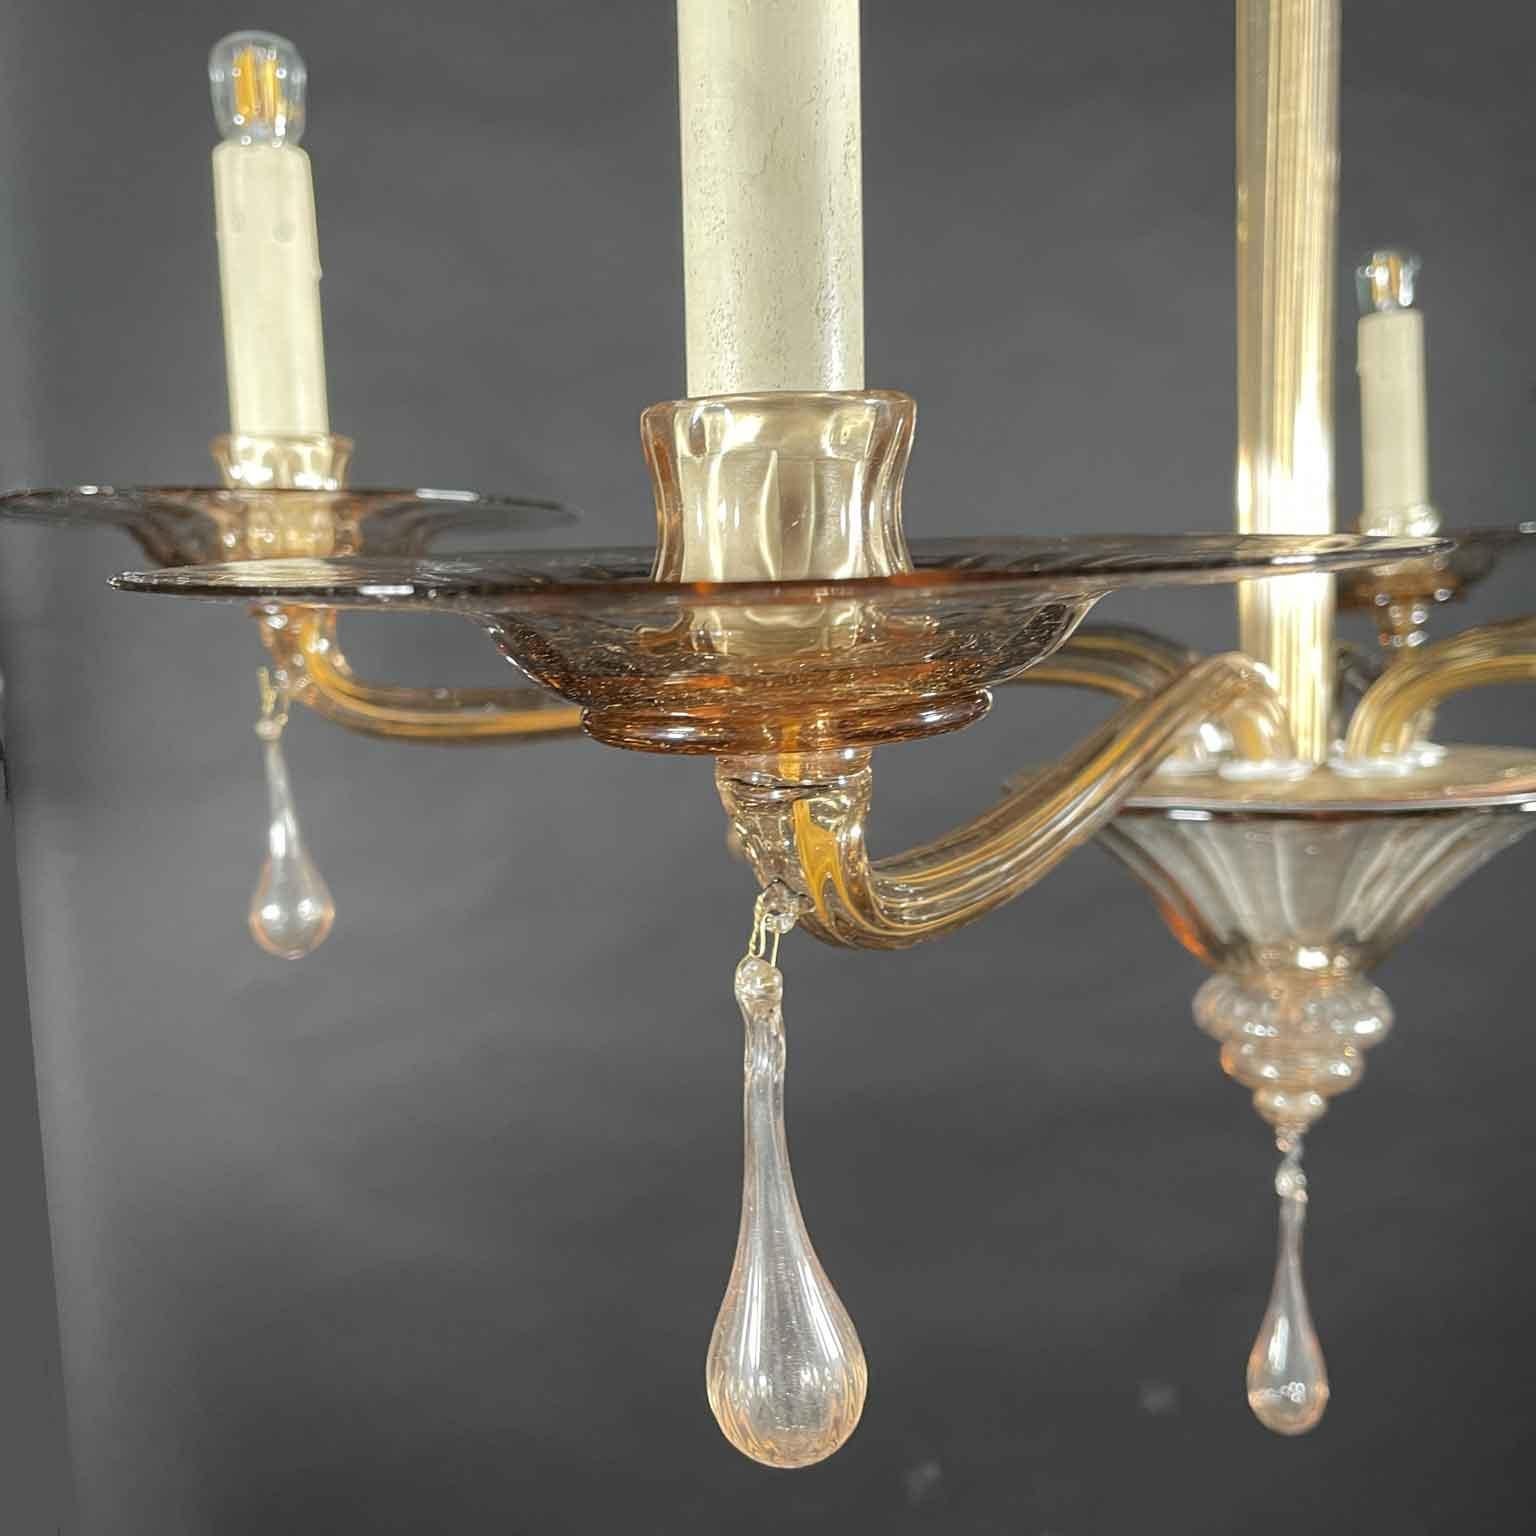 1920 Venetian Glass Murano Glass Chandelier Amber Color Smoked with Six Arms In Good Condition For Sale In Milan, IT